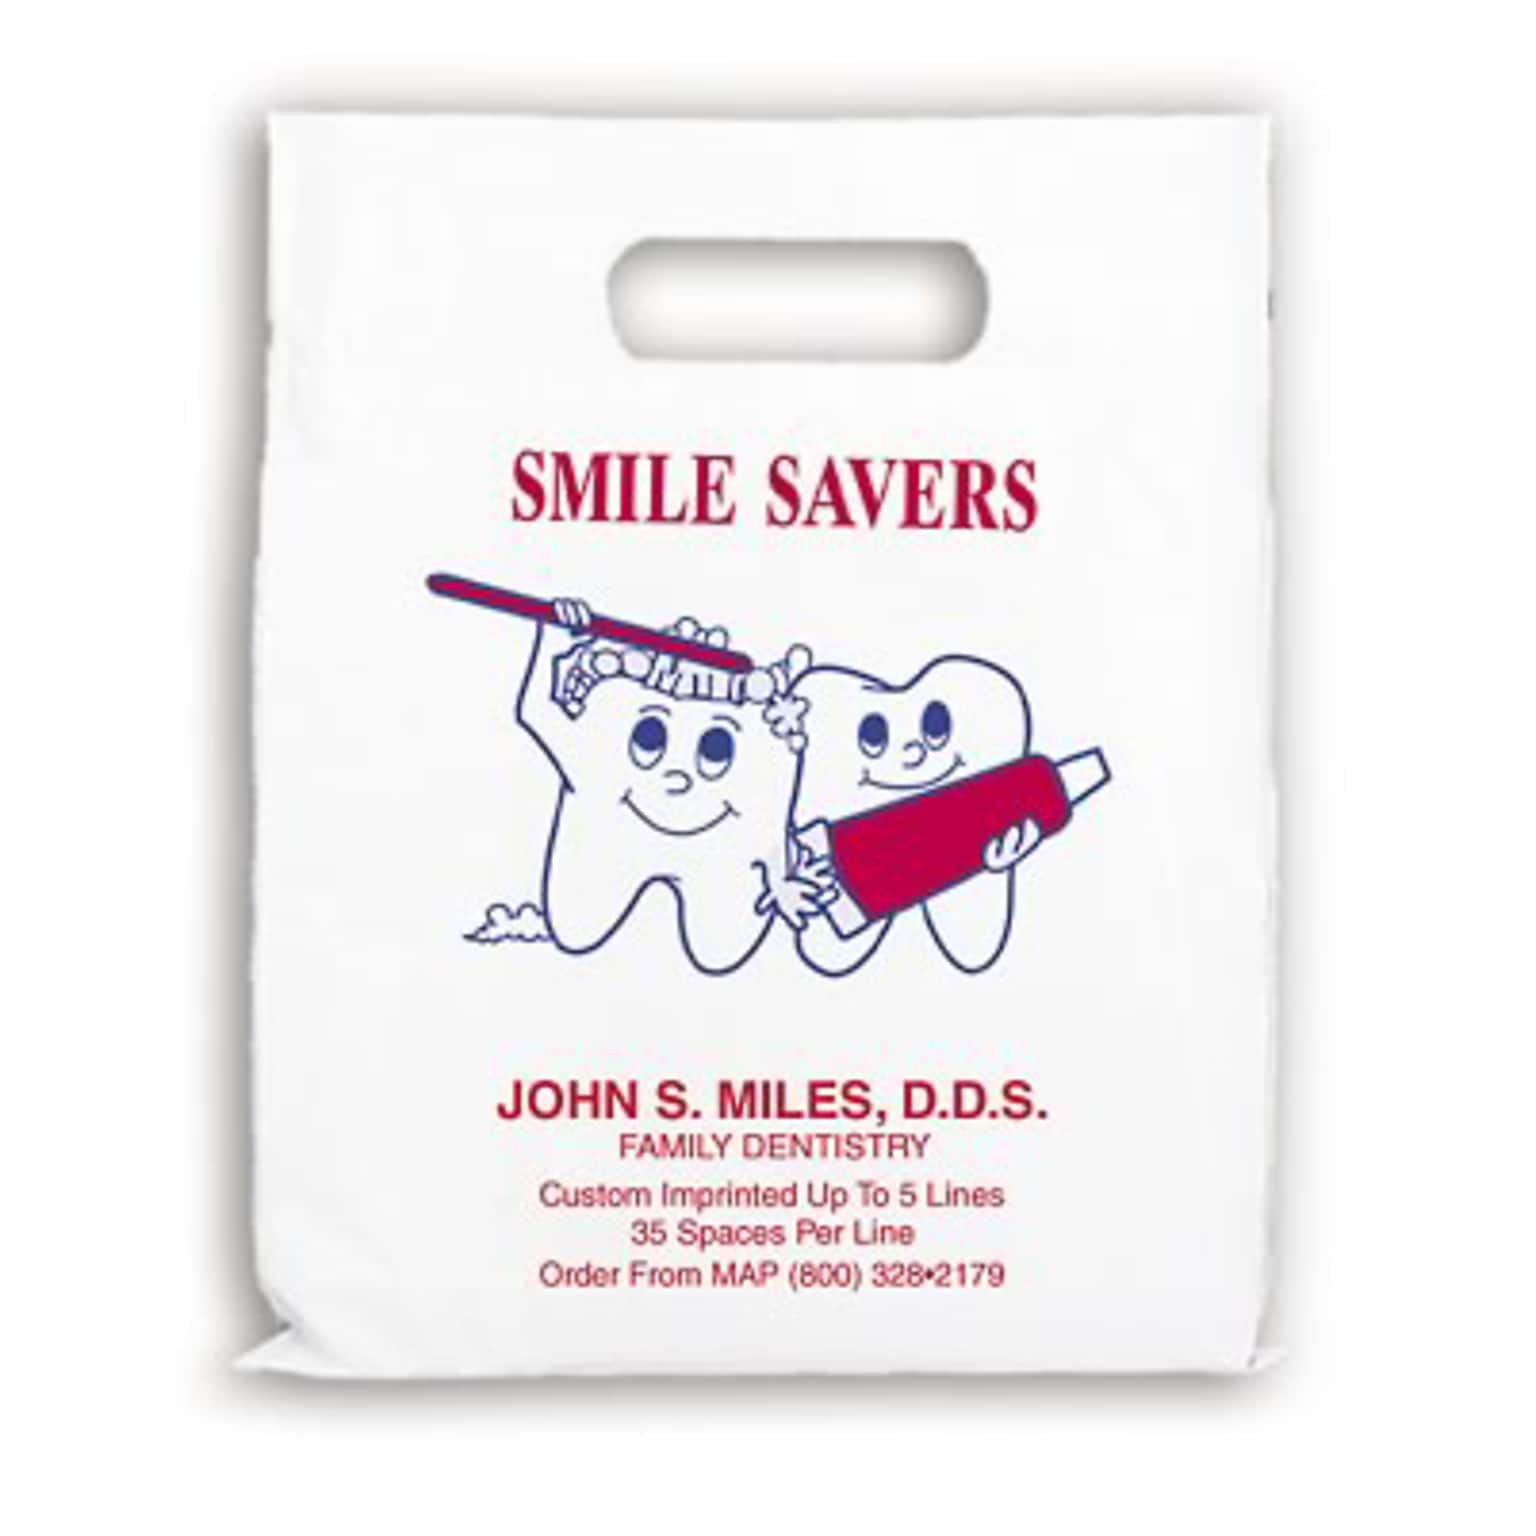 Medical Arts Press® Dental Personalized Small 2-Color Supply Bags; 7-1/2x9, Smile Savers/Tooth Guy, 100 Bags, (60669)